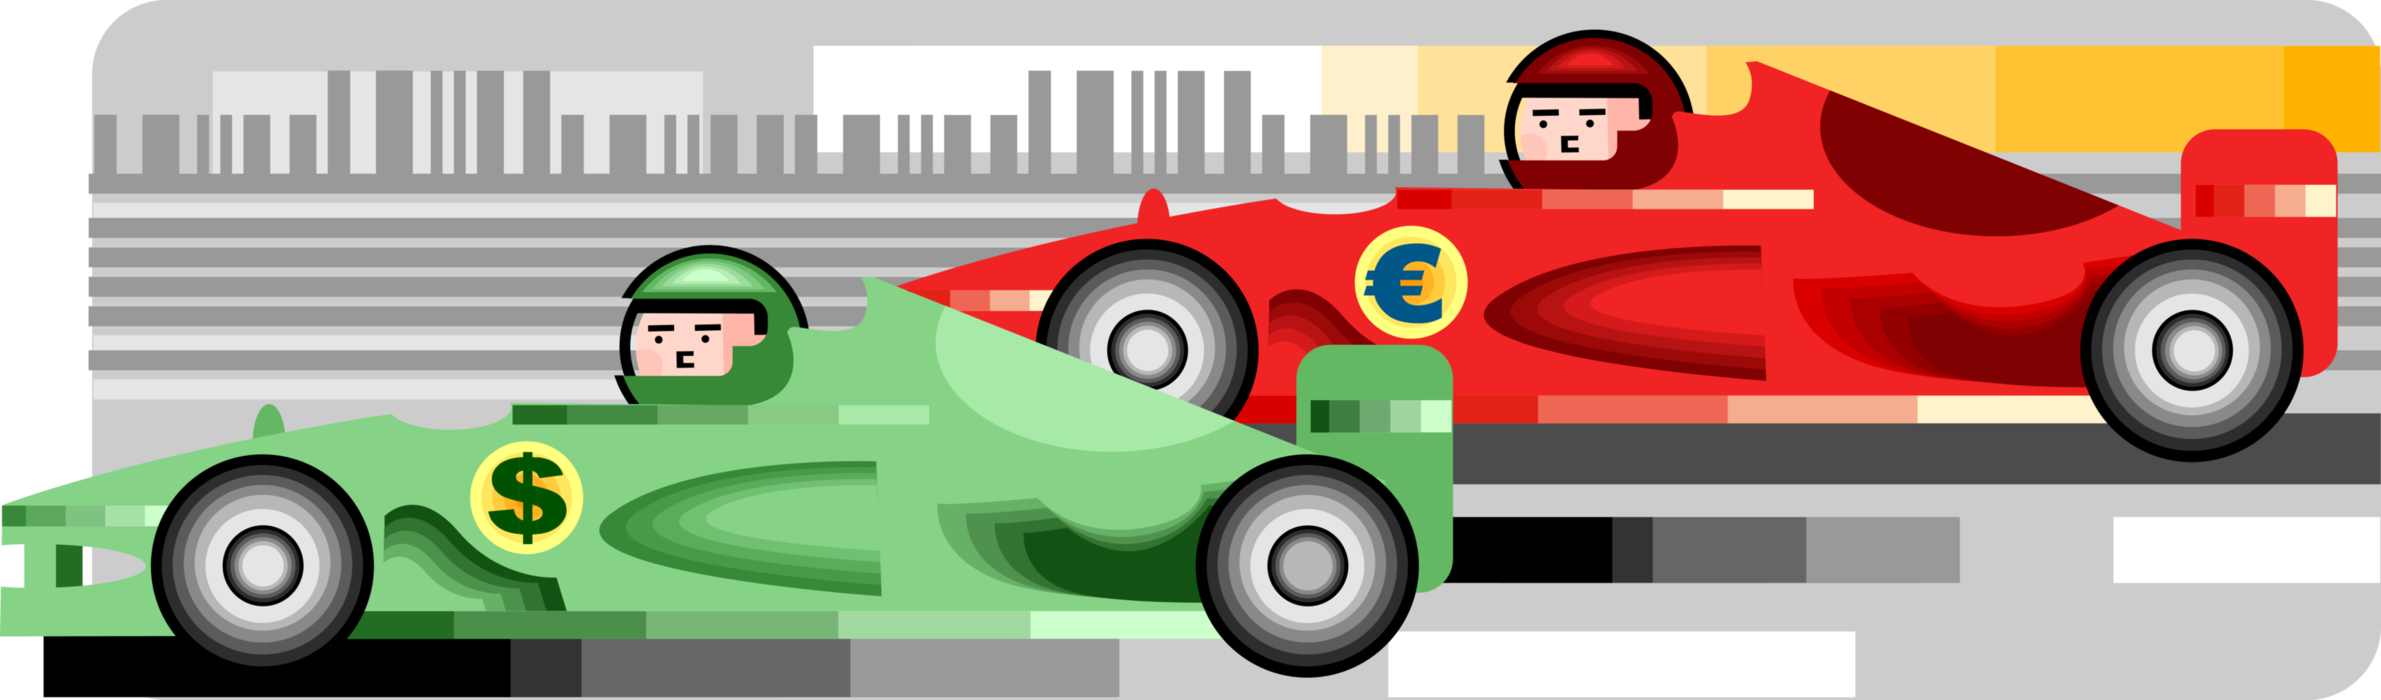 Vector Illustration of Formula One Automobile Motor Racing Car Drivers Compete on Race Track in Euro and Dollar Competition